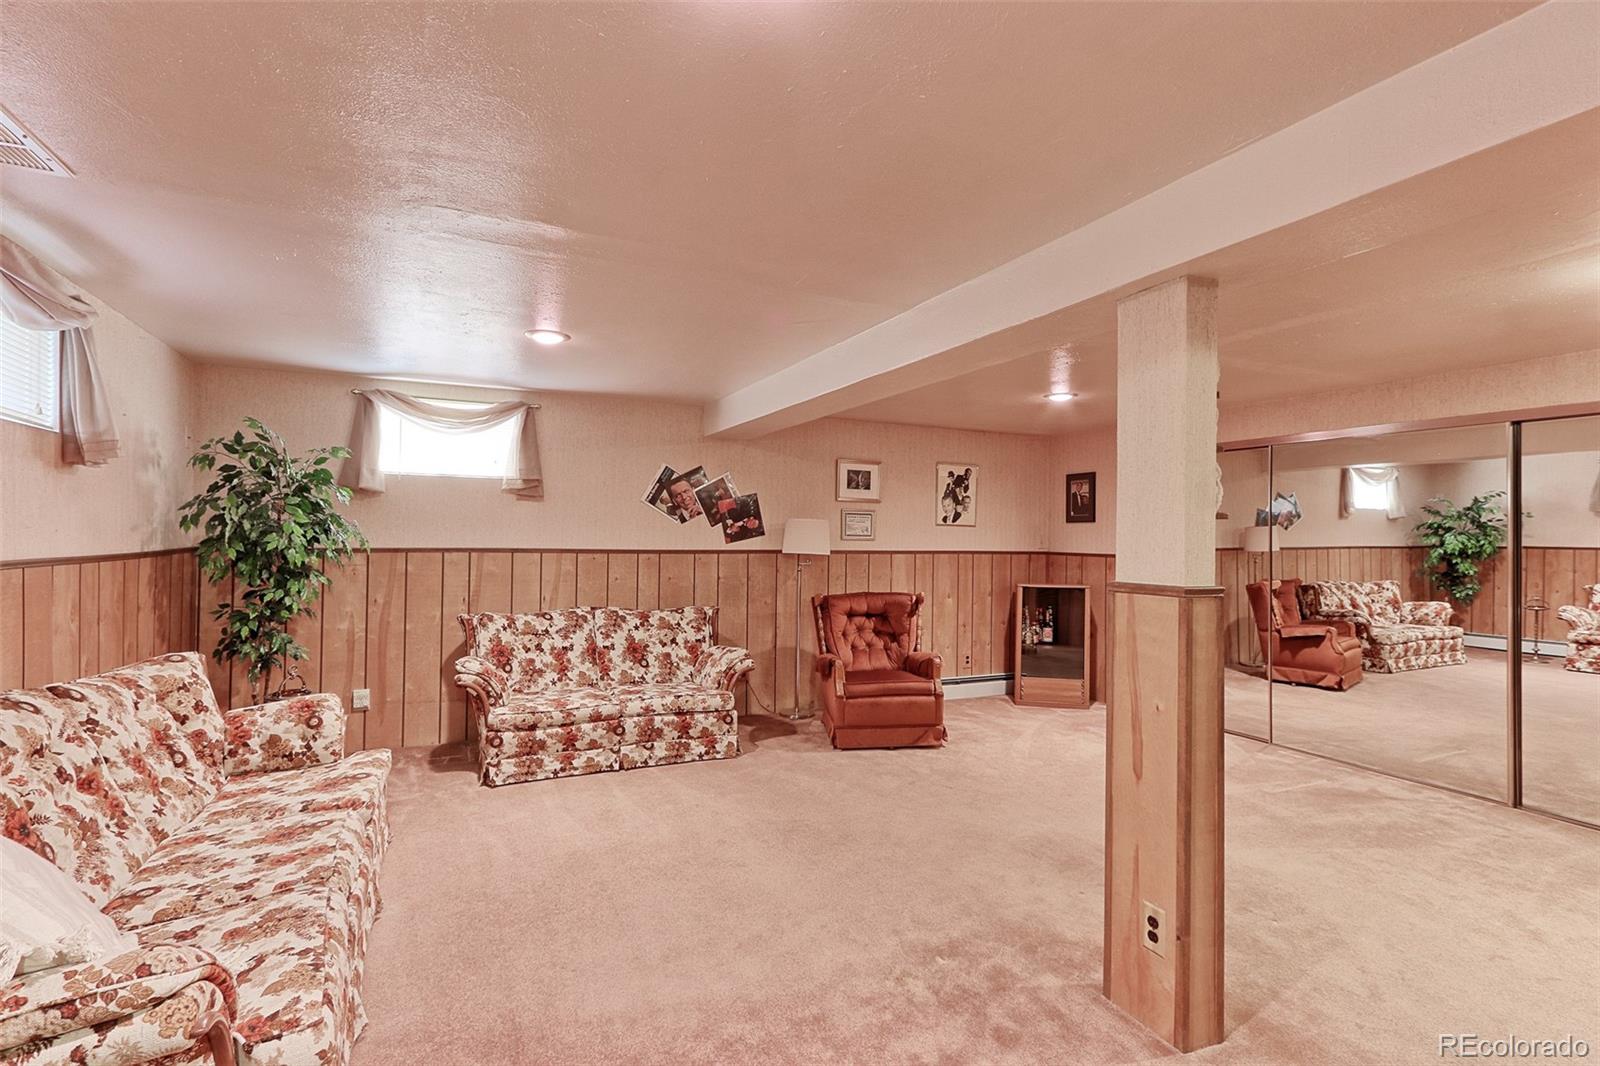 6927 Dudley, Arvada, CO